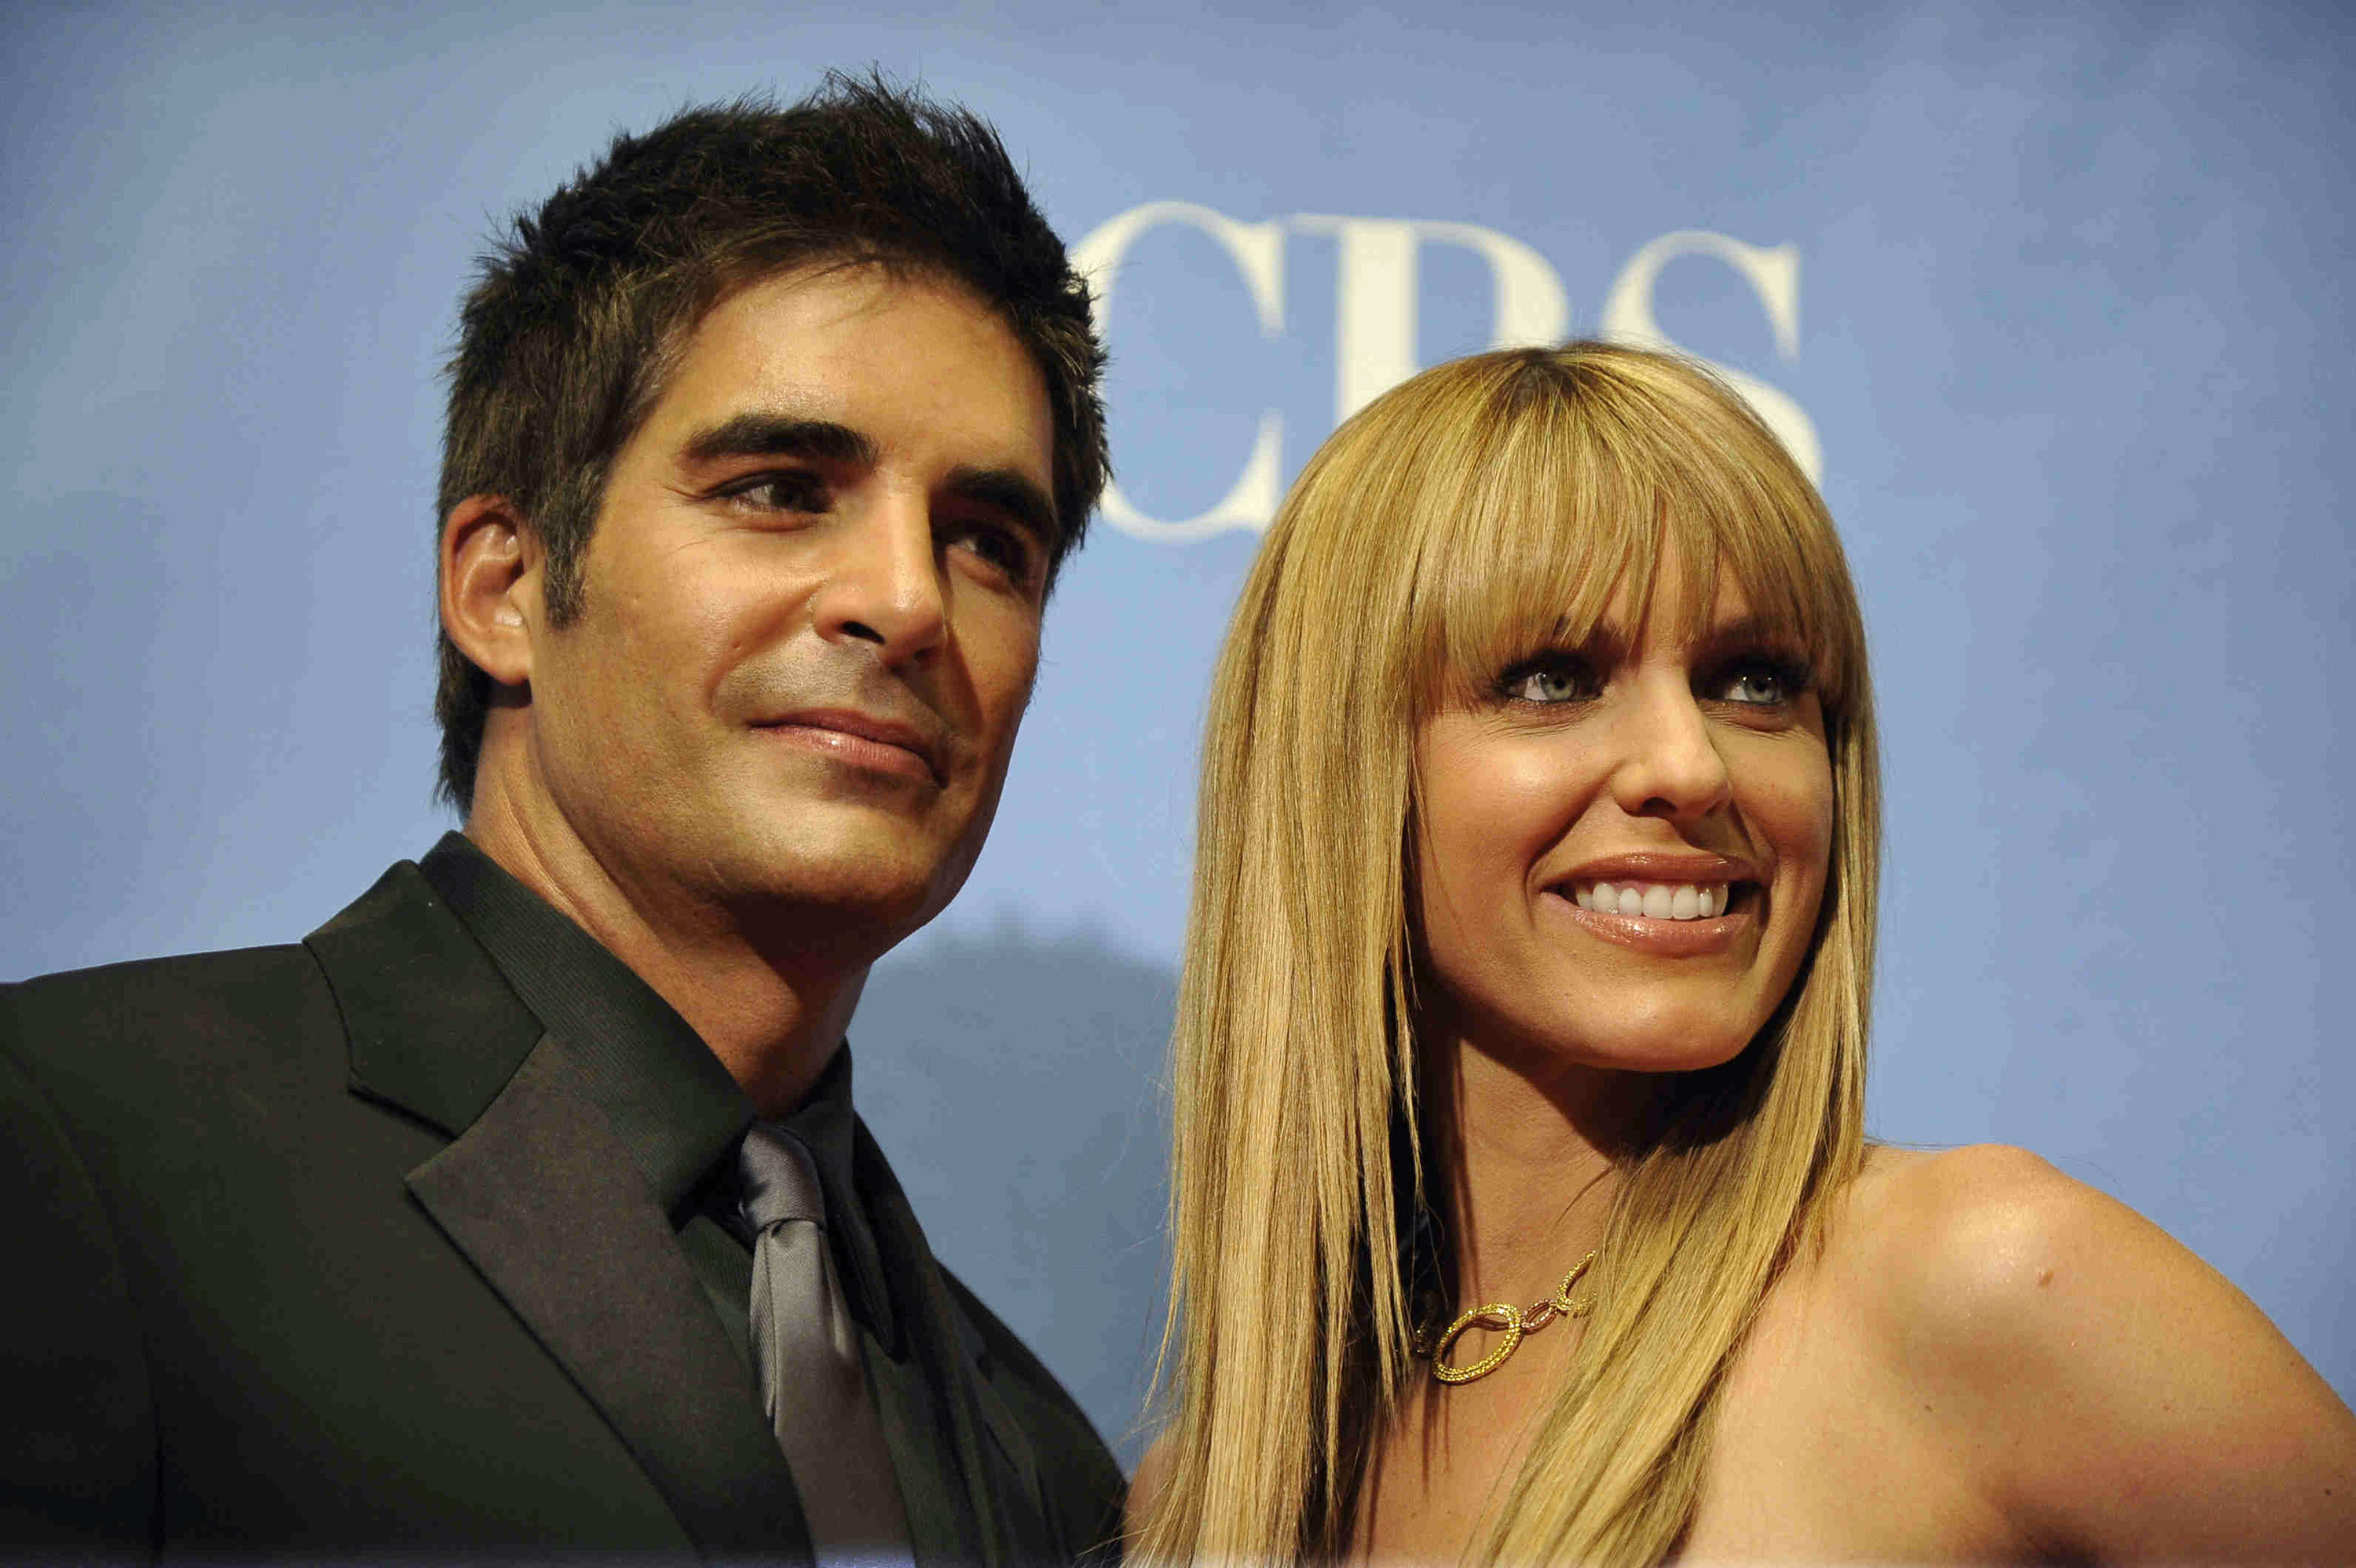 'Days of Our Lives' actors Galen Gering and Arianne Zucker posing together at the Daytime Emmys.